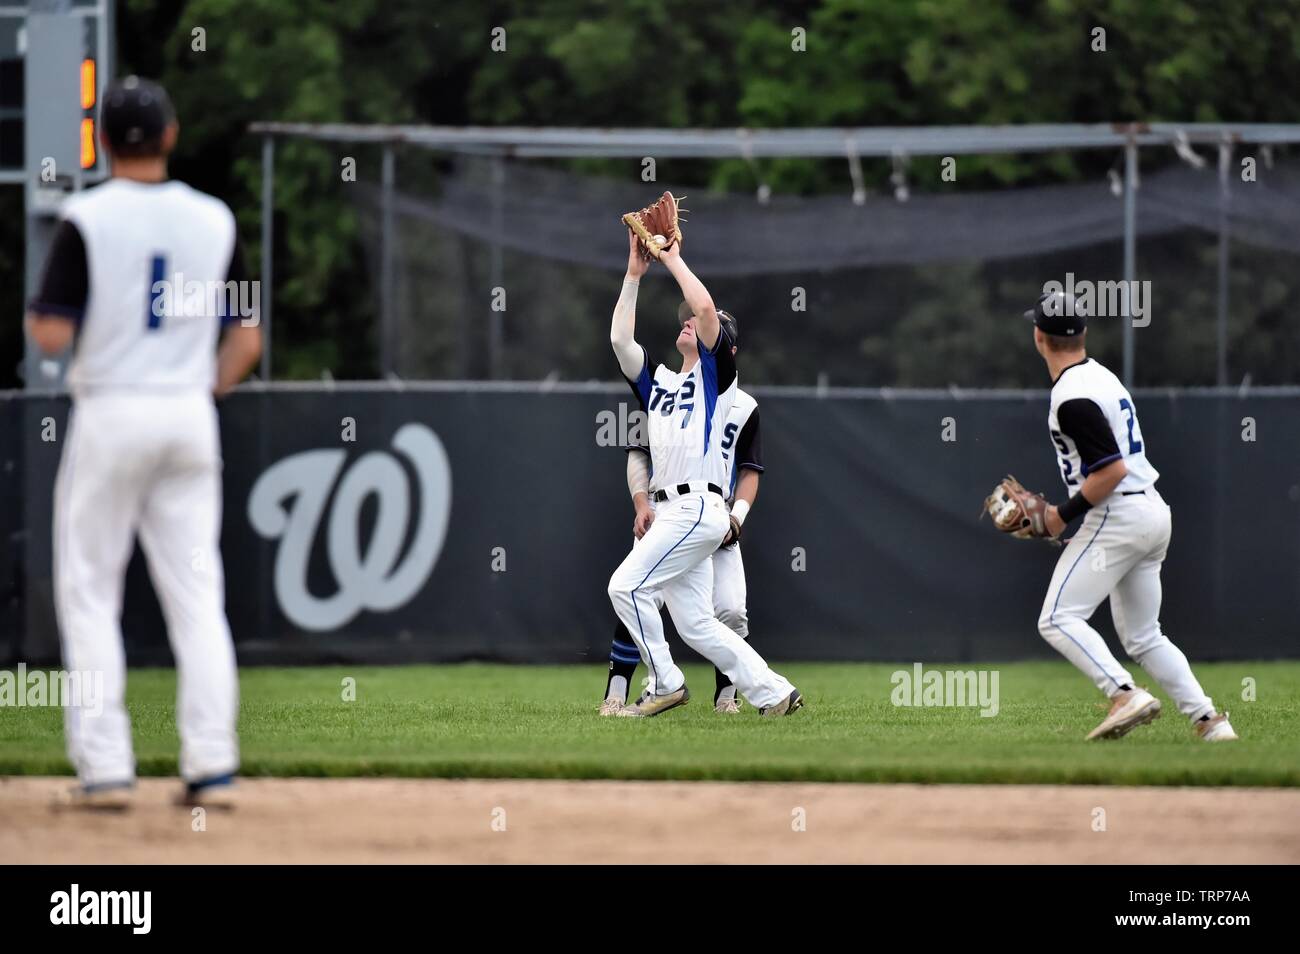 Second baseman ranging into shallow left field to make a catch of a pop fly ball. USA. Stock Photo